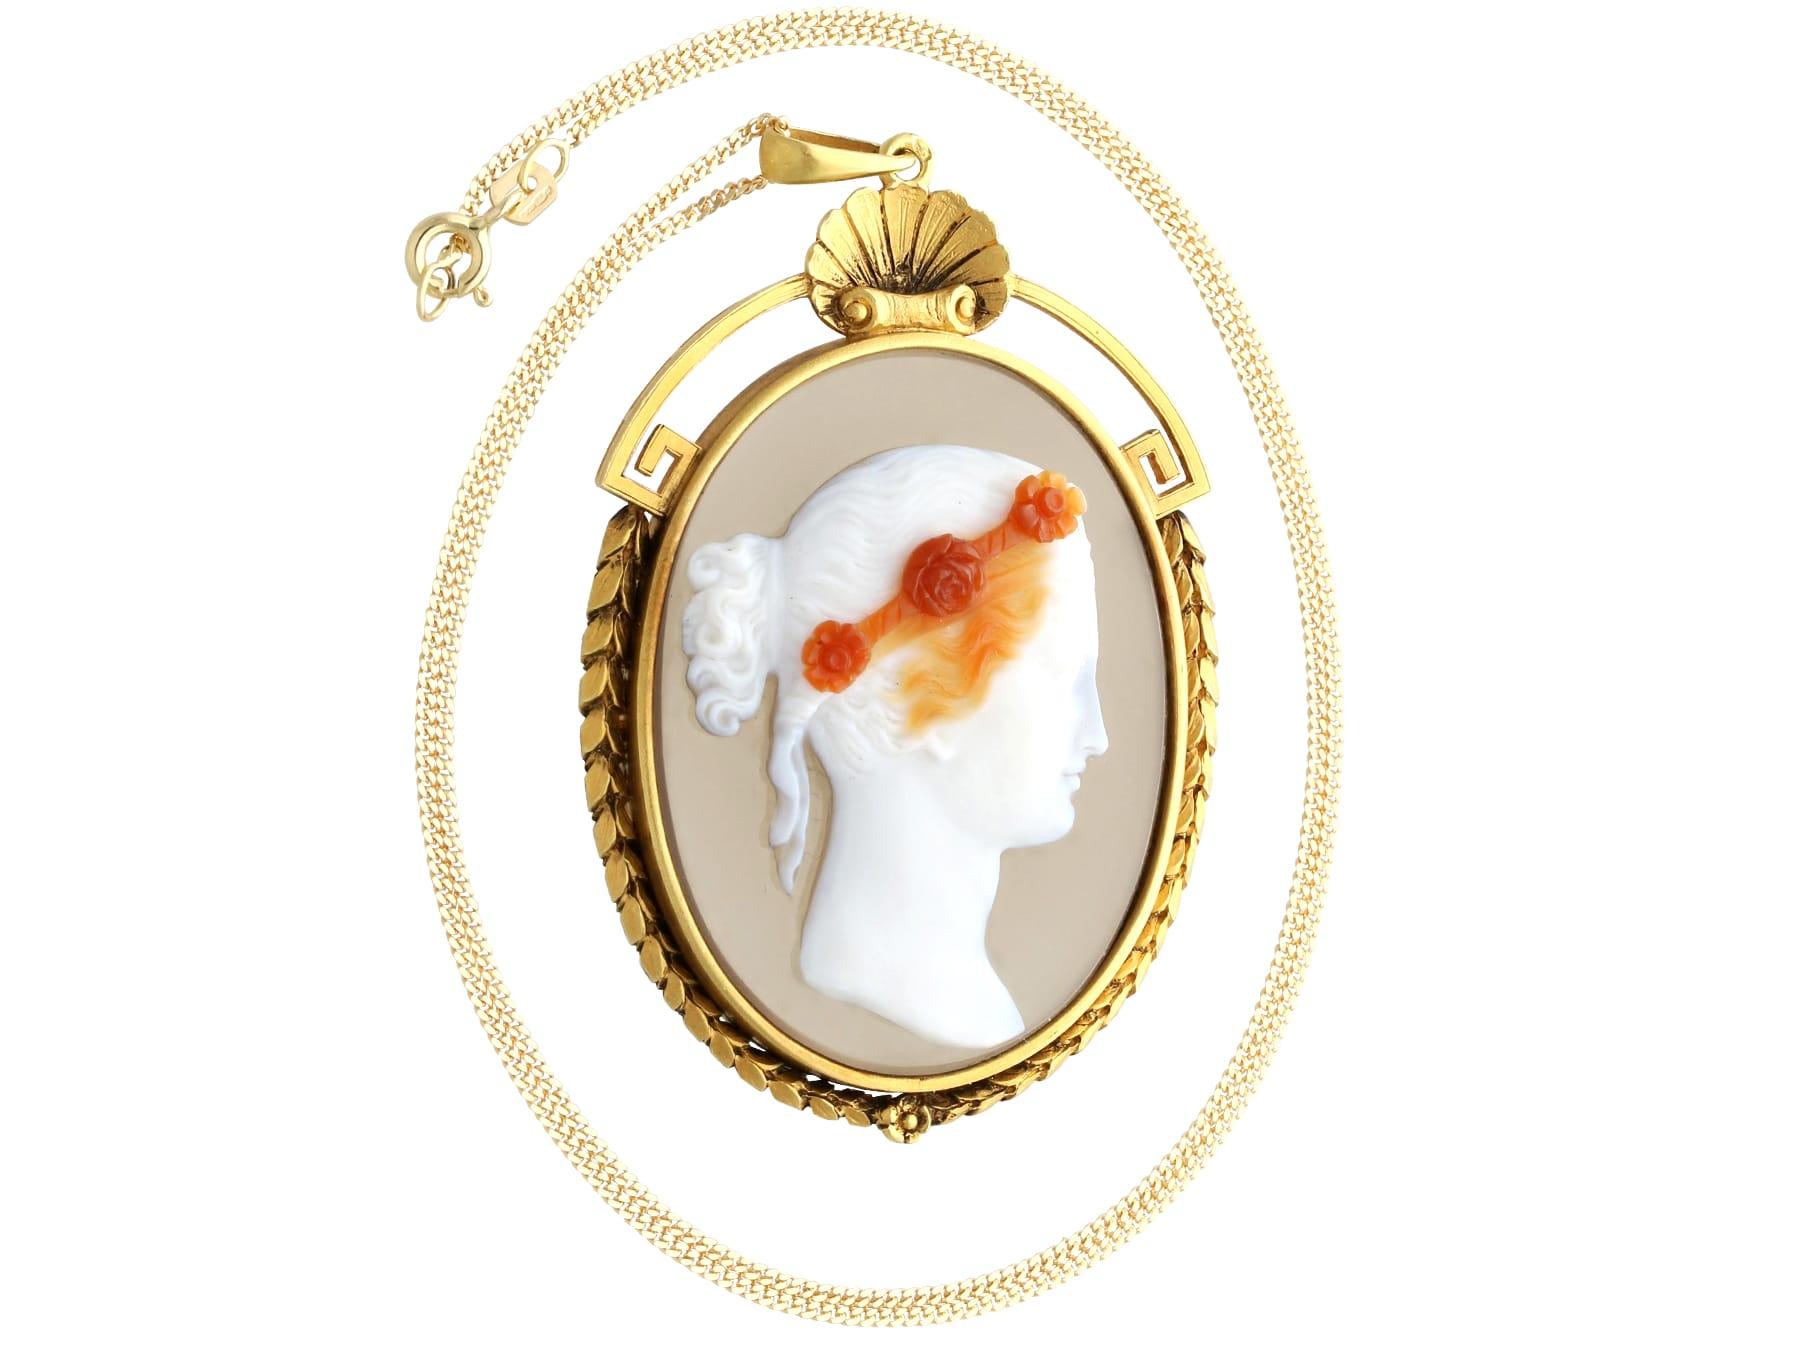 A stunning, fine and impressive antique 18 karat yellow gold cameo pendant; part of our diverse antique jewellery and estate jewelry collections.

This stunning, fine and impressive antique Victorian pendant has been crafted in 18k yellow gold.

The